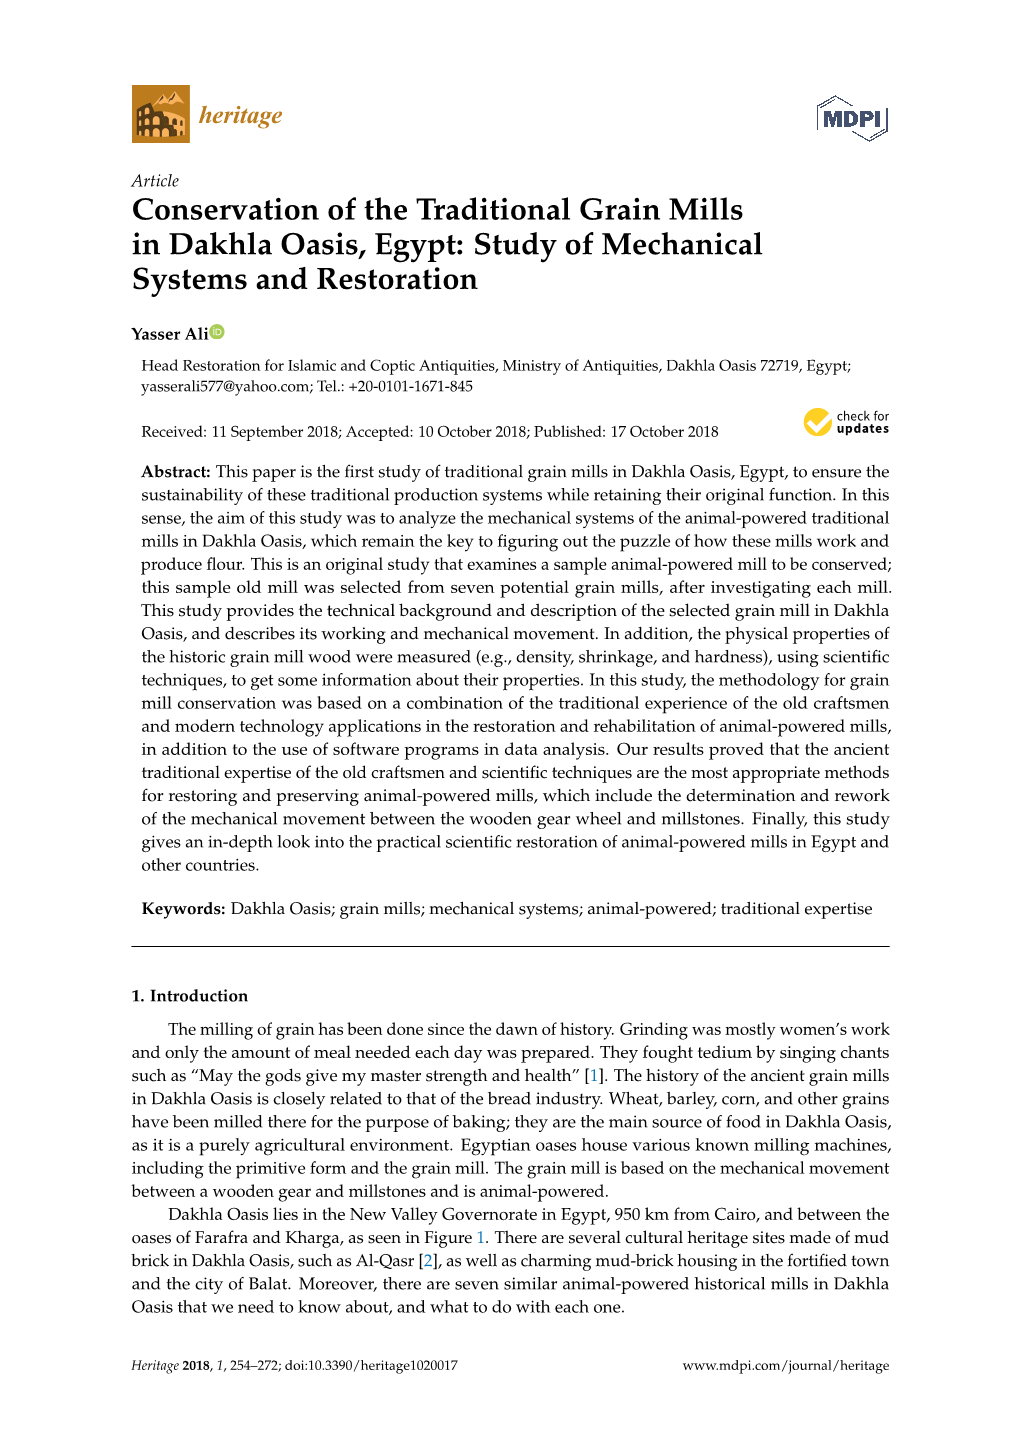 Conservation of the Traditional Grain Mills in Dakhla Oasis, Egypt: Study of Mechanical Systems and Restoration